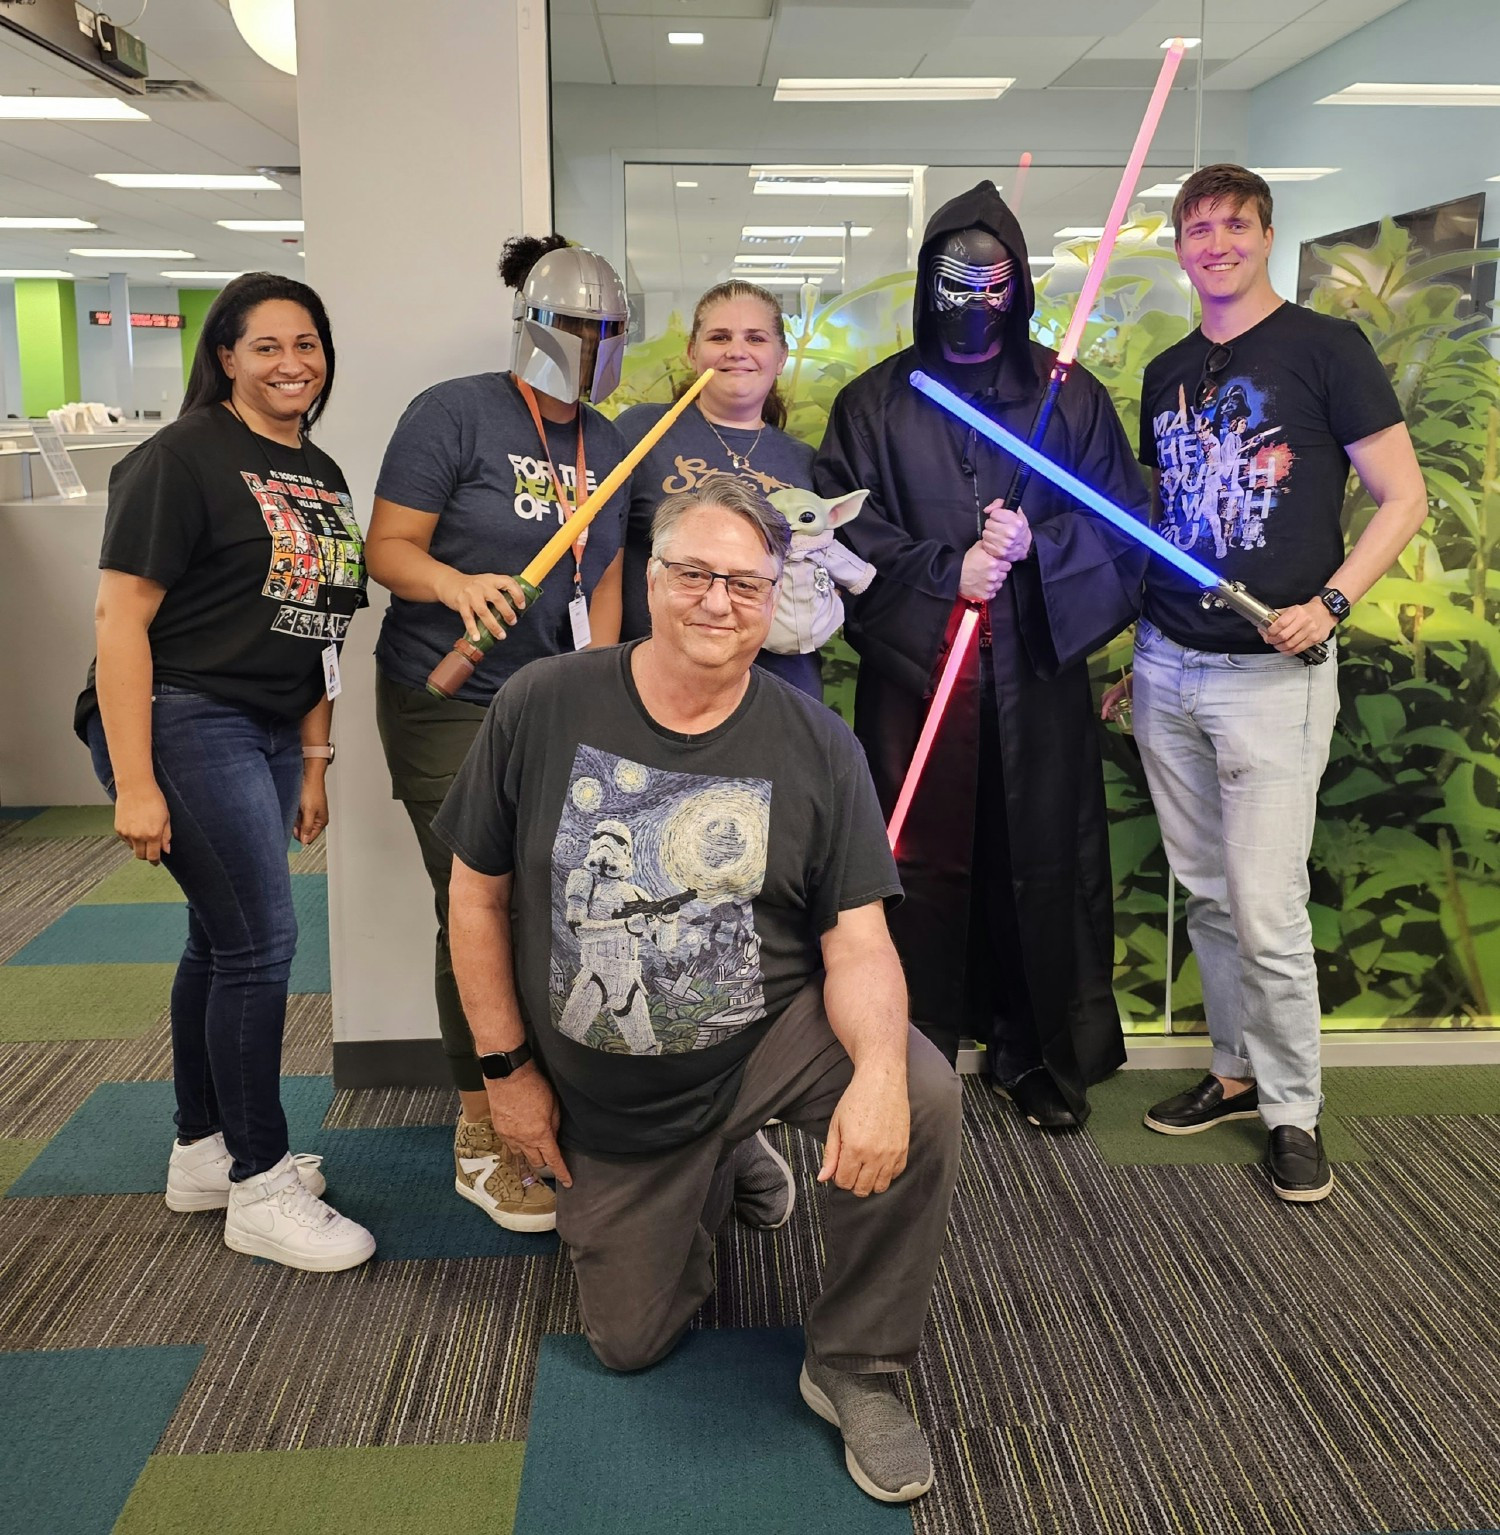 MDVIP celebrates May the 4th Be With You, allowing employees to show that the force comes from within.